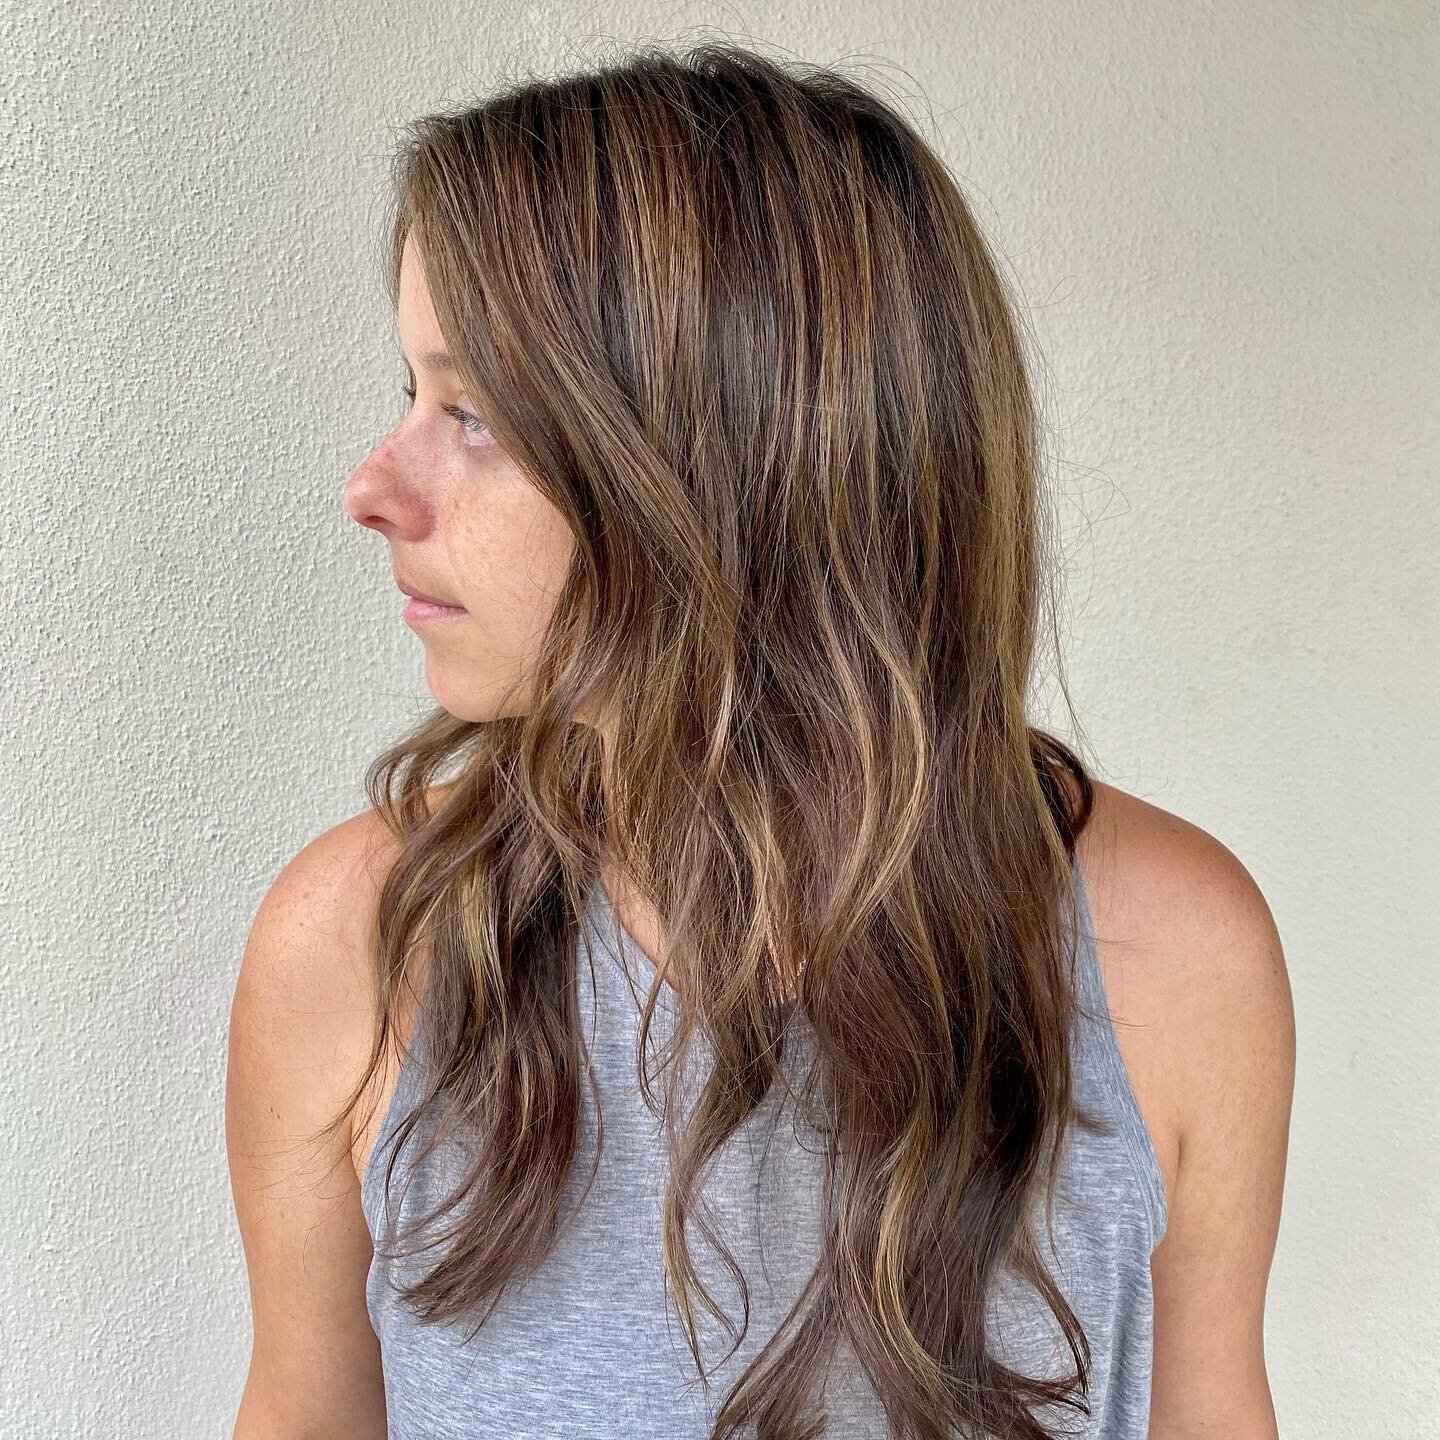 Please let us change your hair! It keeps things spicy. Swipe over to see more of this blonde to dimensional brunette transformation by Kimmi.